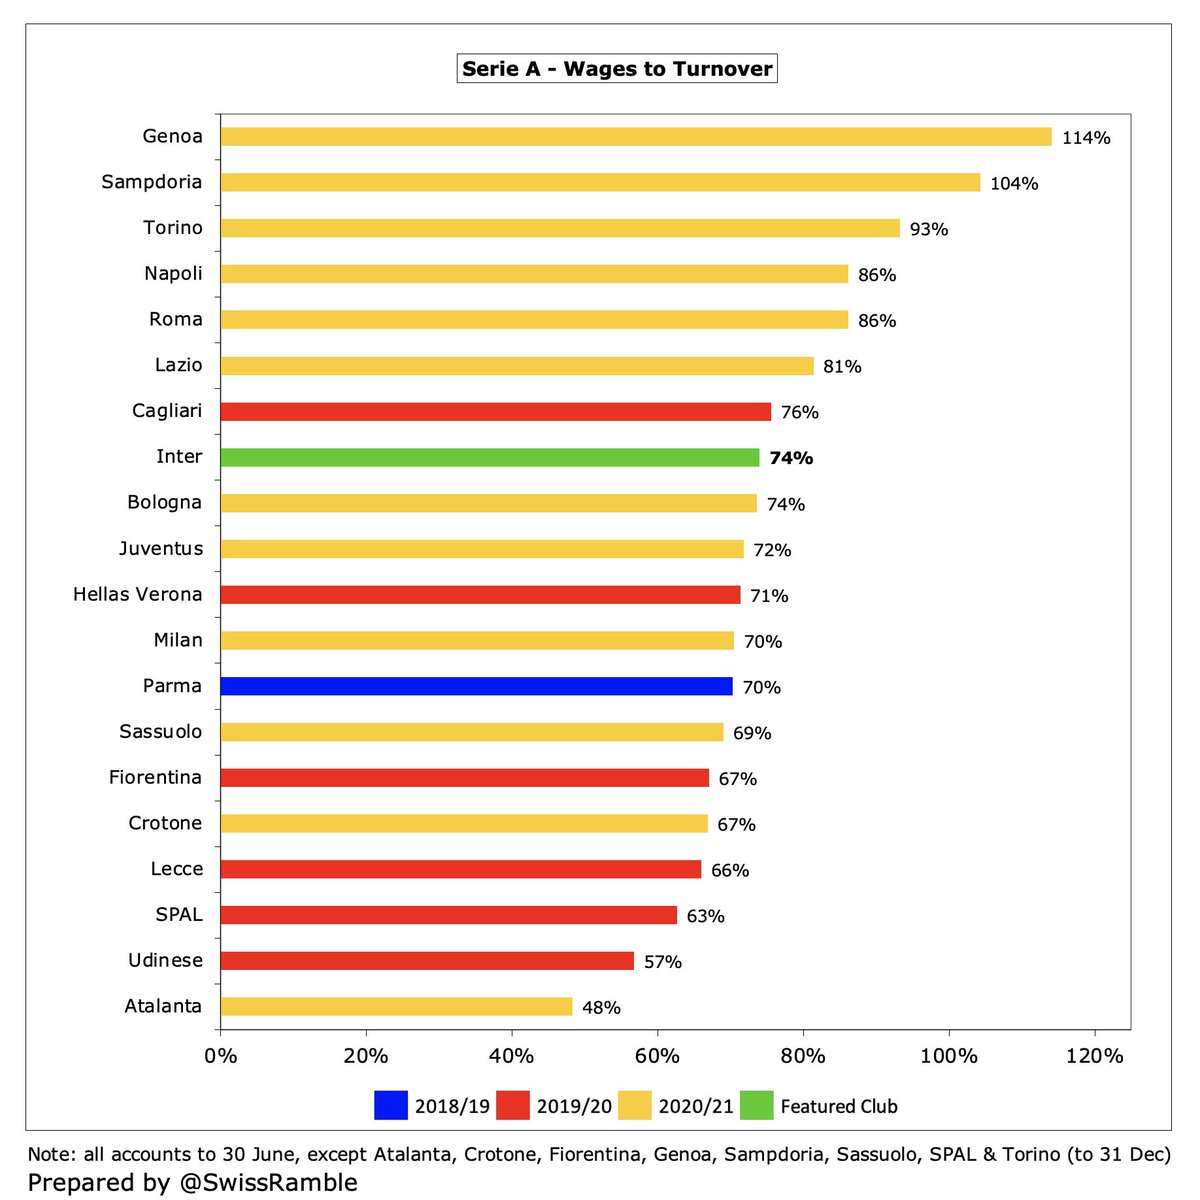  #Inter wages to turnover ratio increased from 66% to 74%, though this was inflated by salaries deferred from 2019/20 and the lack of match day revenue. Around the same level as Juventus 72% and Milan 70%, though better than Roma and Napoli (both 86%).